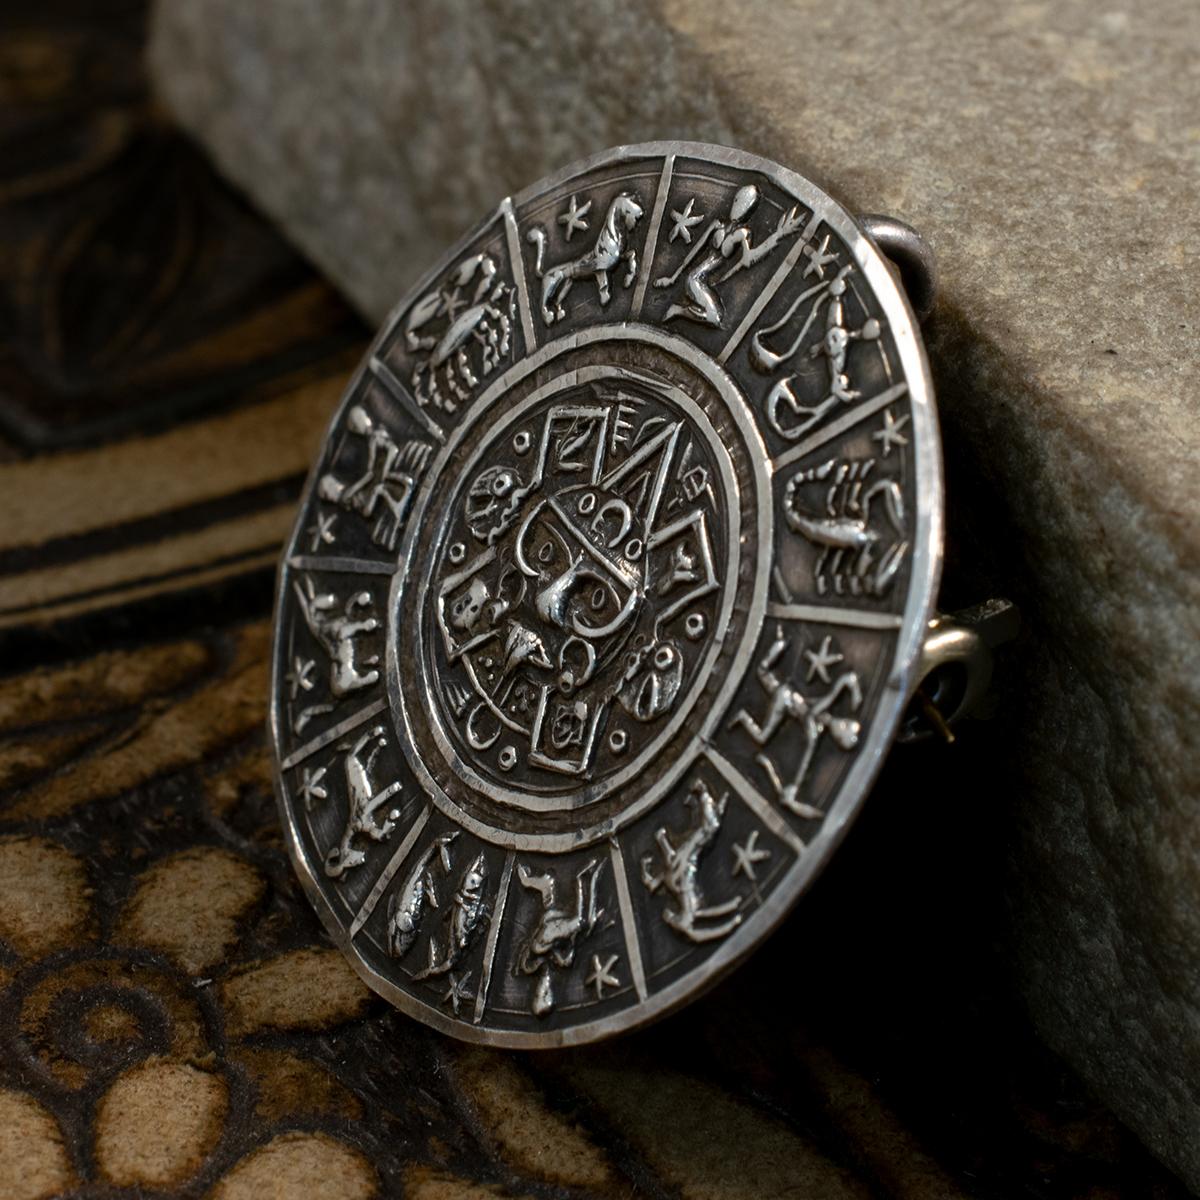 A Sterling Silver Brooch Pendant stamped on the reverse, Mexico and Sterling 925. The design on the brooch shows the 12 signs of the zodiac, each being intimately detailed and clear. In the centre is a Mayan or Aztec depiction of the sun all in a